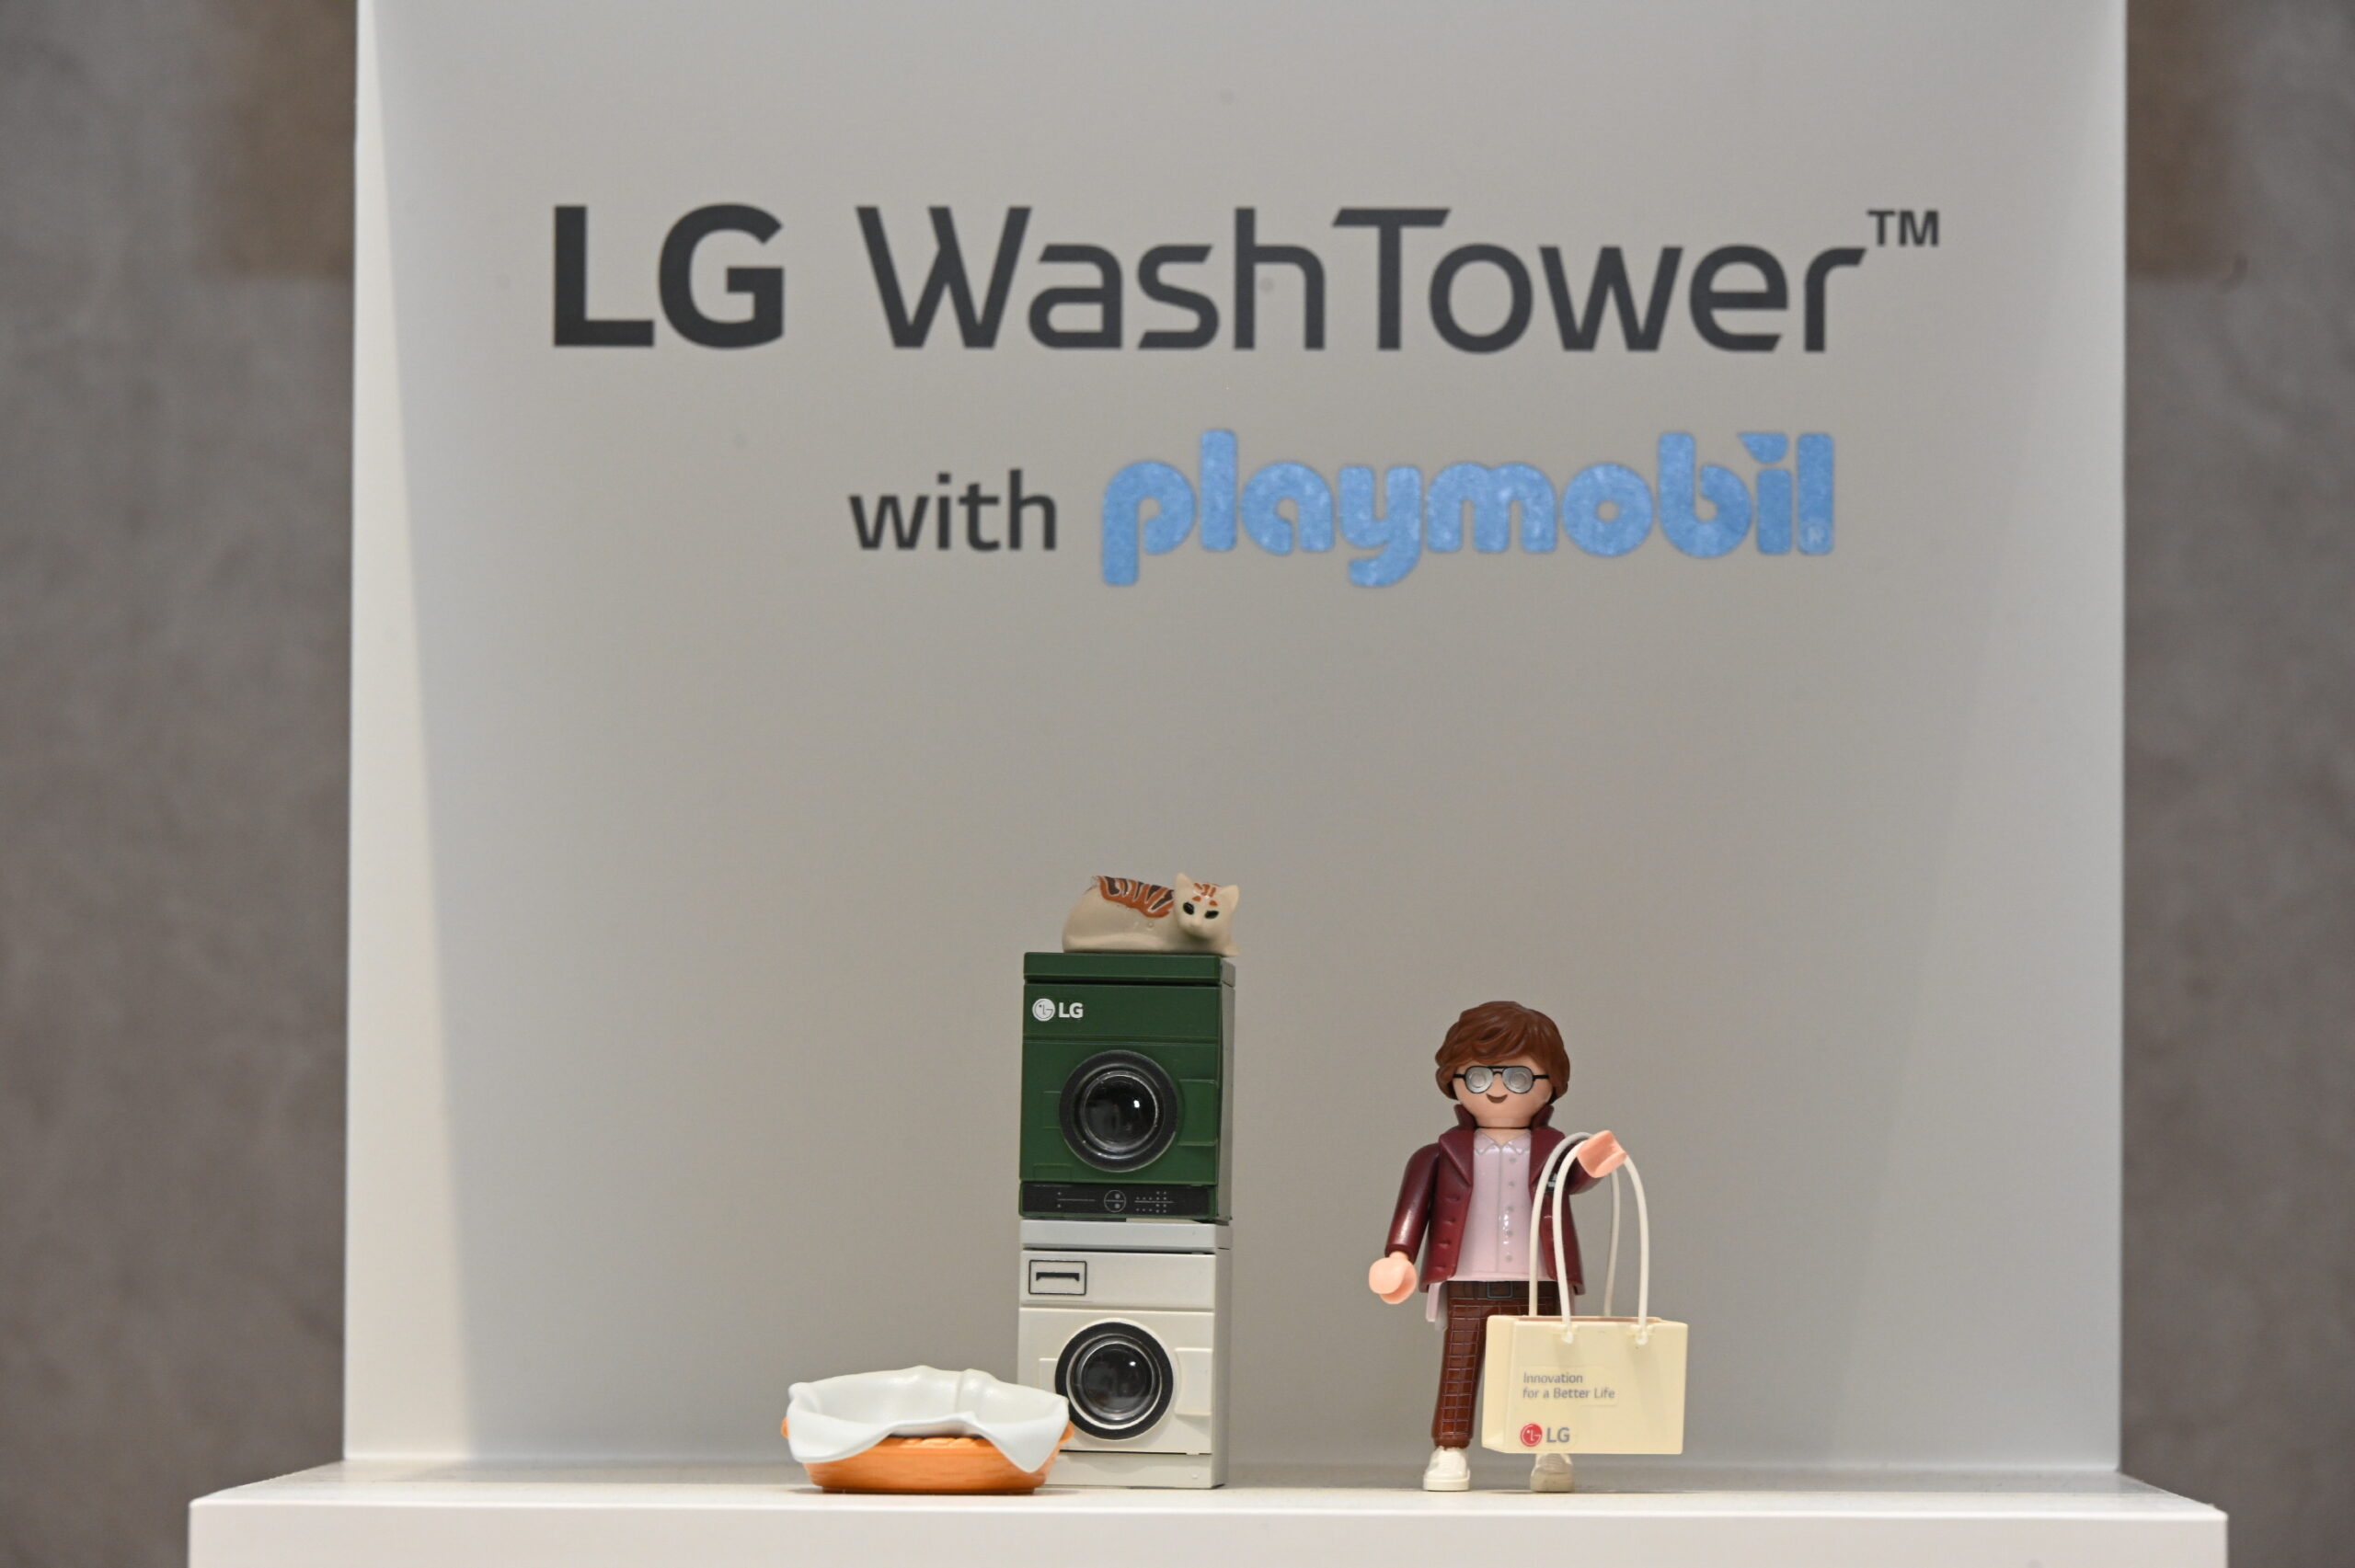 Miniature-scale of LG WashTowerTM and character figures by LG and PLAYMOBIL collection